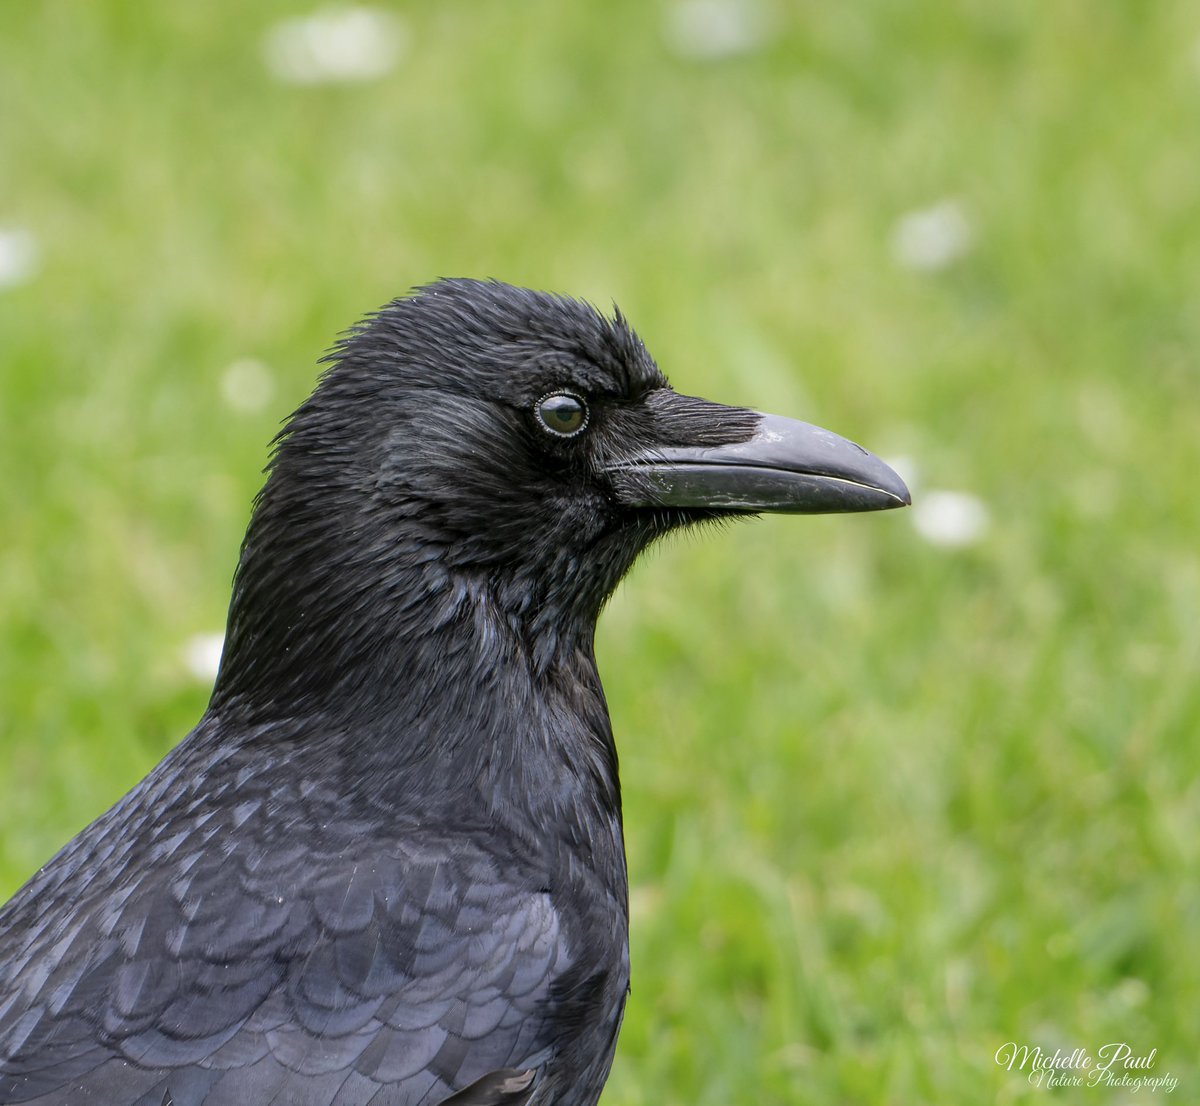 Good morning and welcome to Saturday! It’s going to be a sunny, warm morning here (I’m trying not to get too excited!) ☀️ This Carrion Crow was relaxing in a field of daisies. What a beauty, I just love those feathers and that beak 🖤